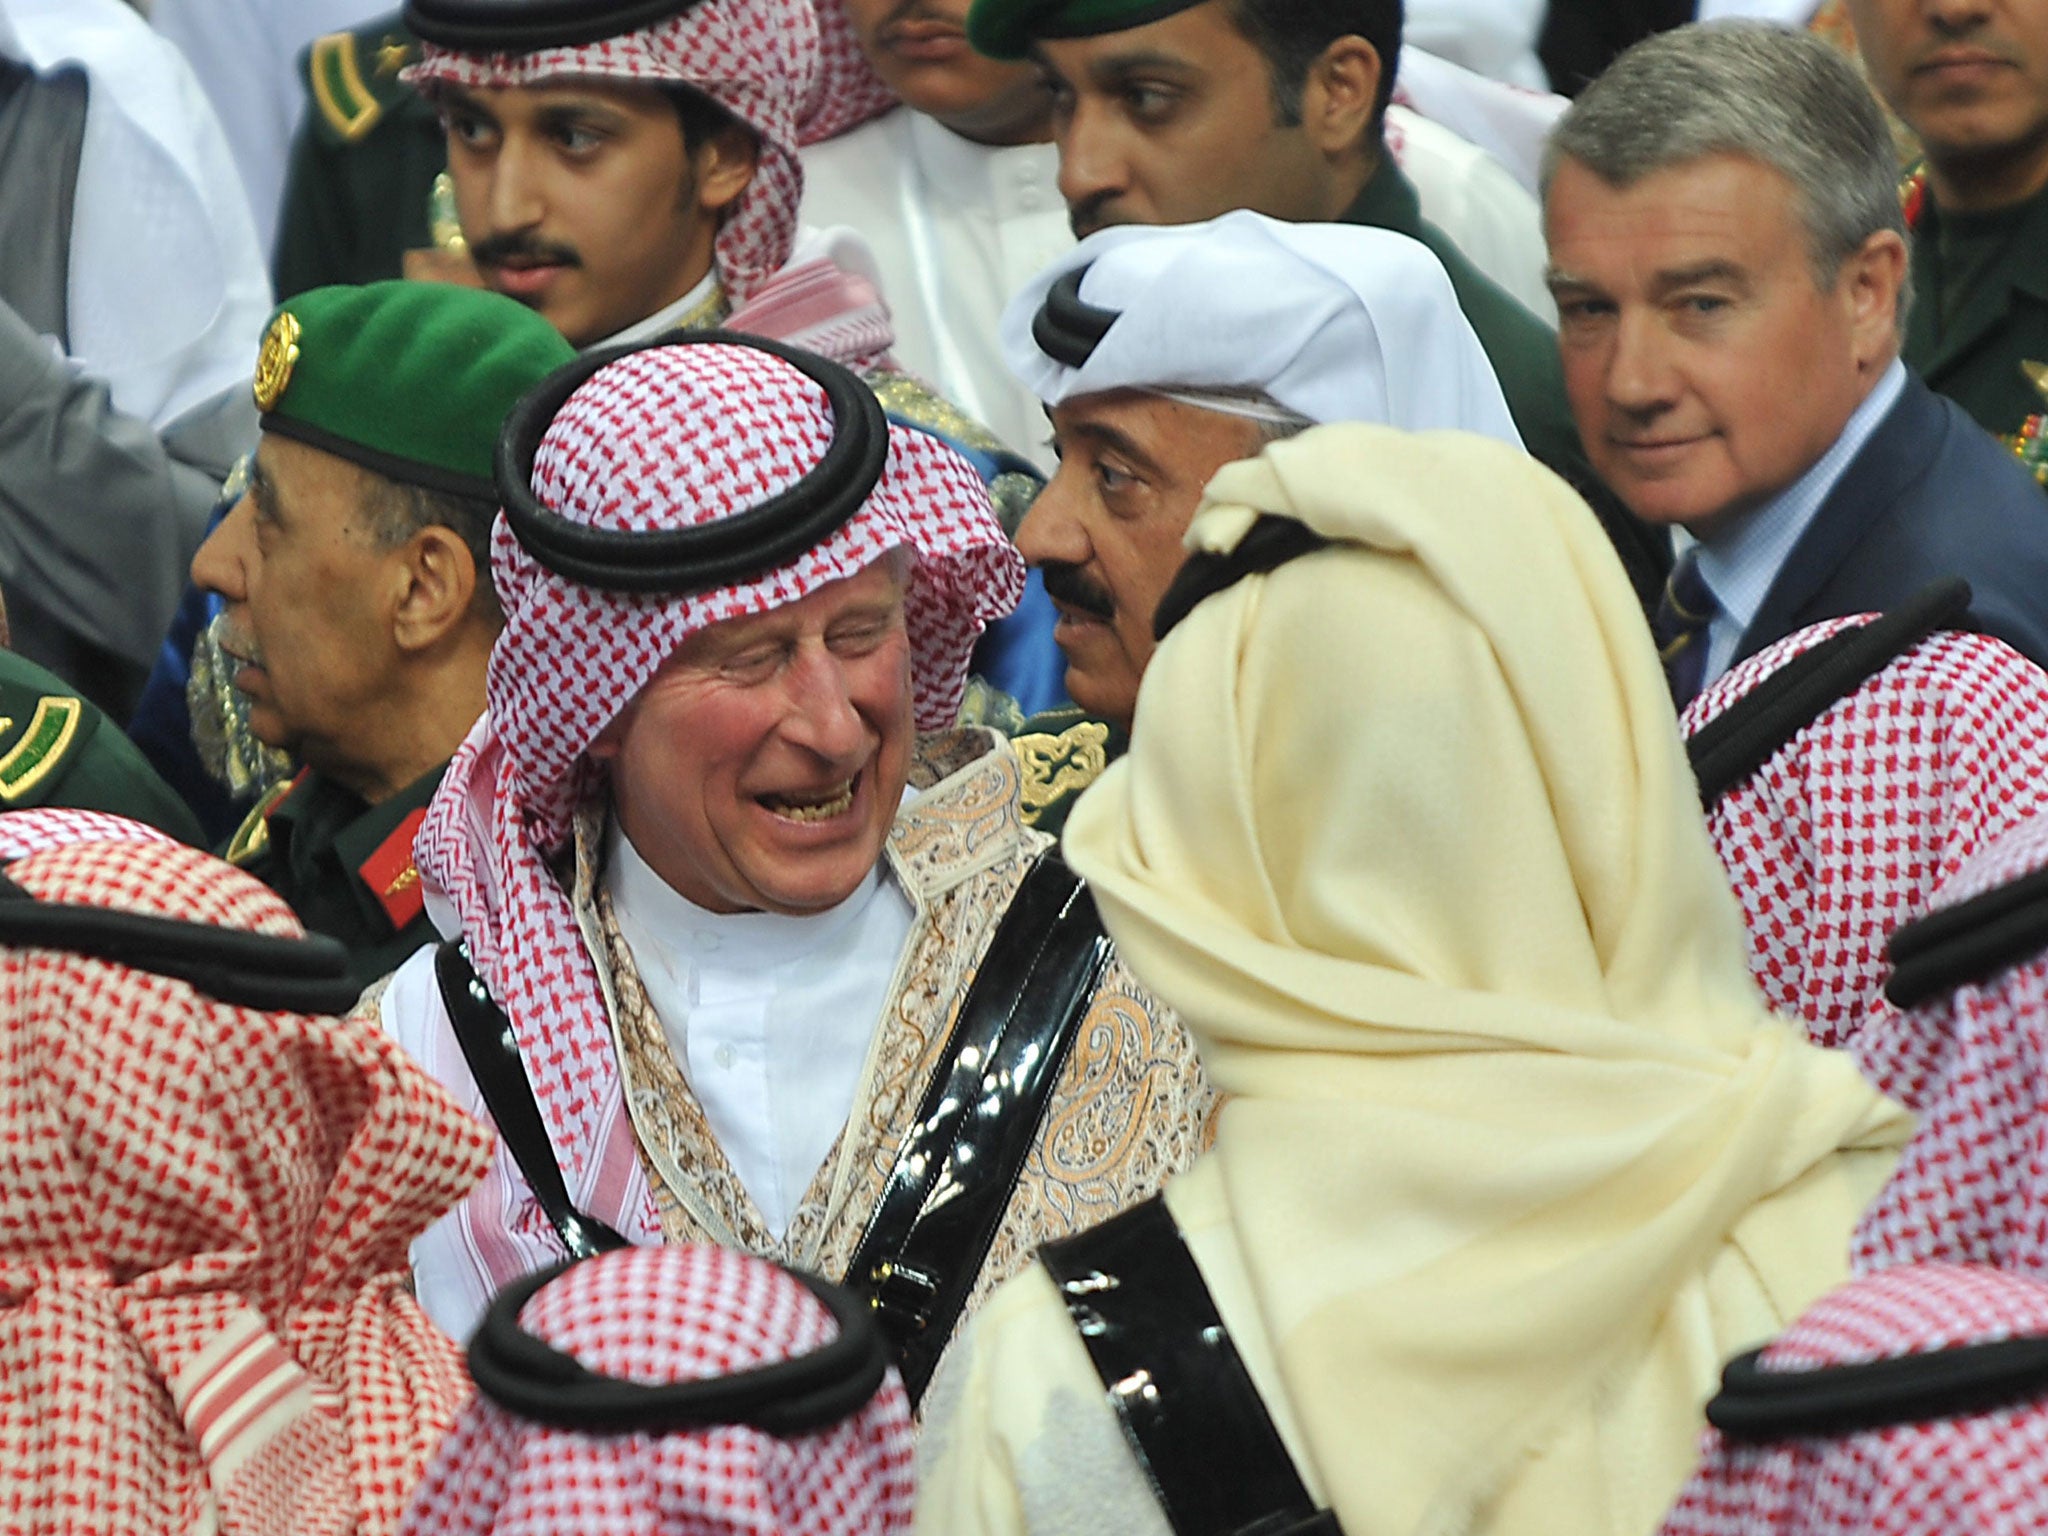 Prince Charles talks with unidentified Saudi Emirs after the end of traditional dancing on a tour last year